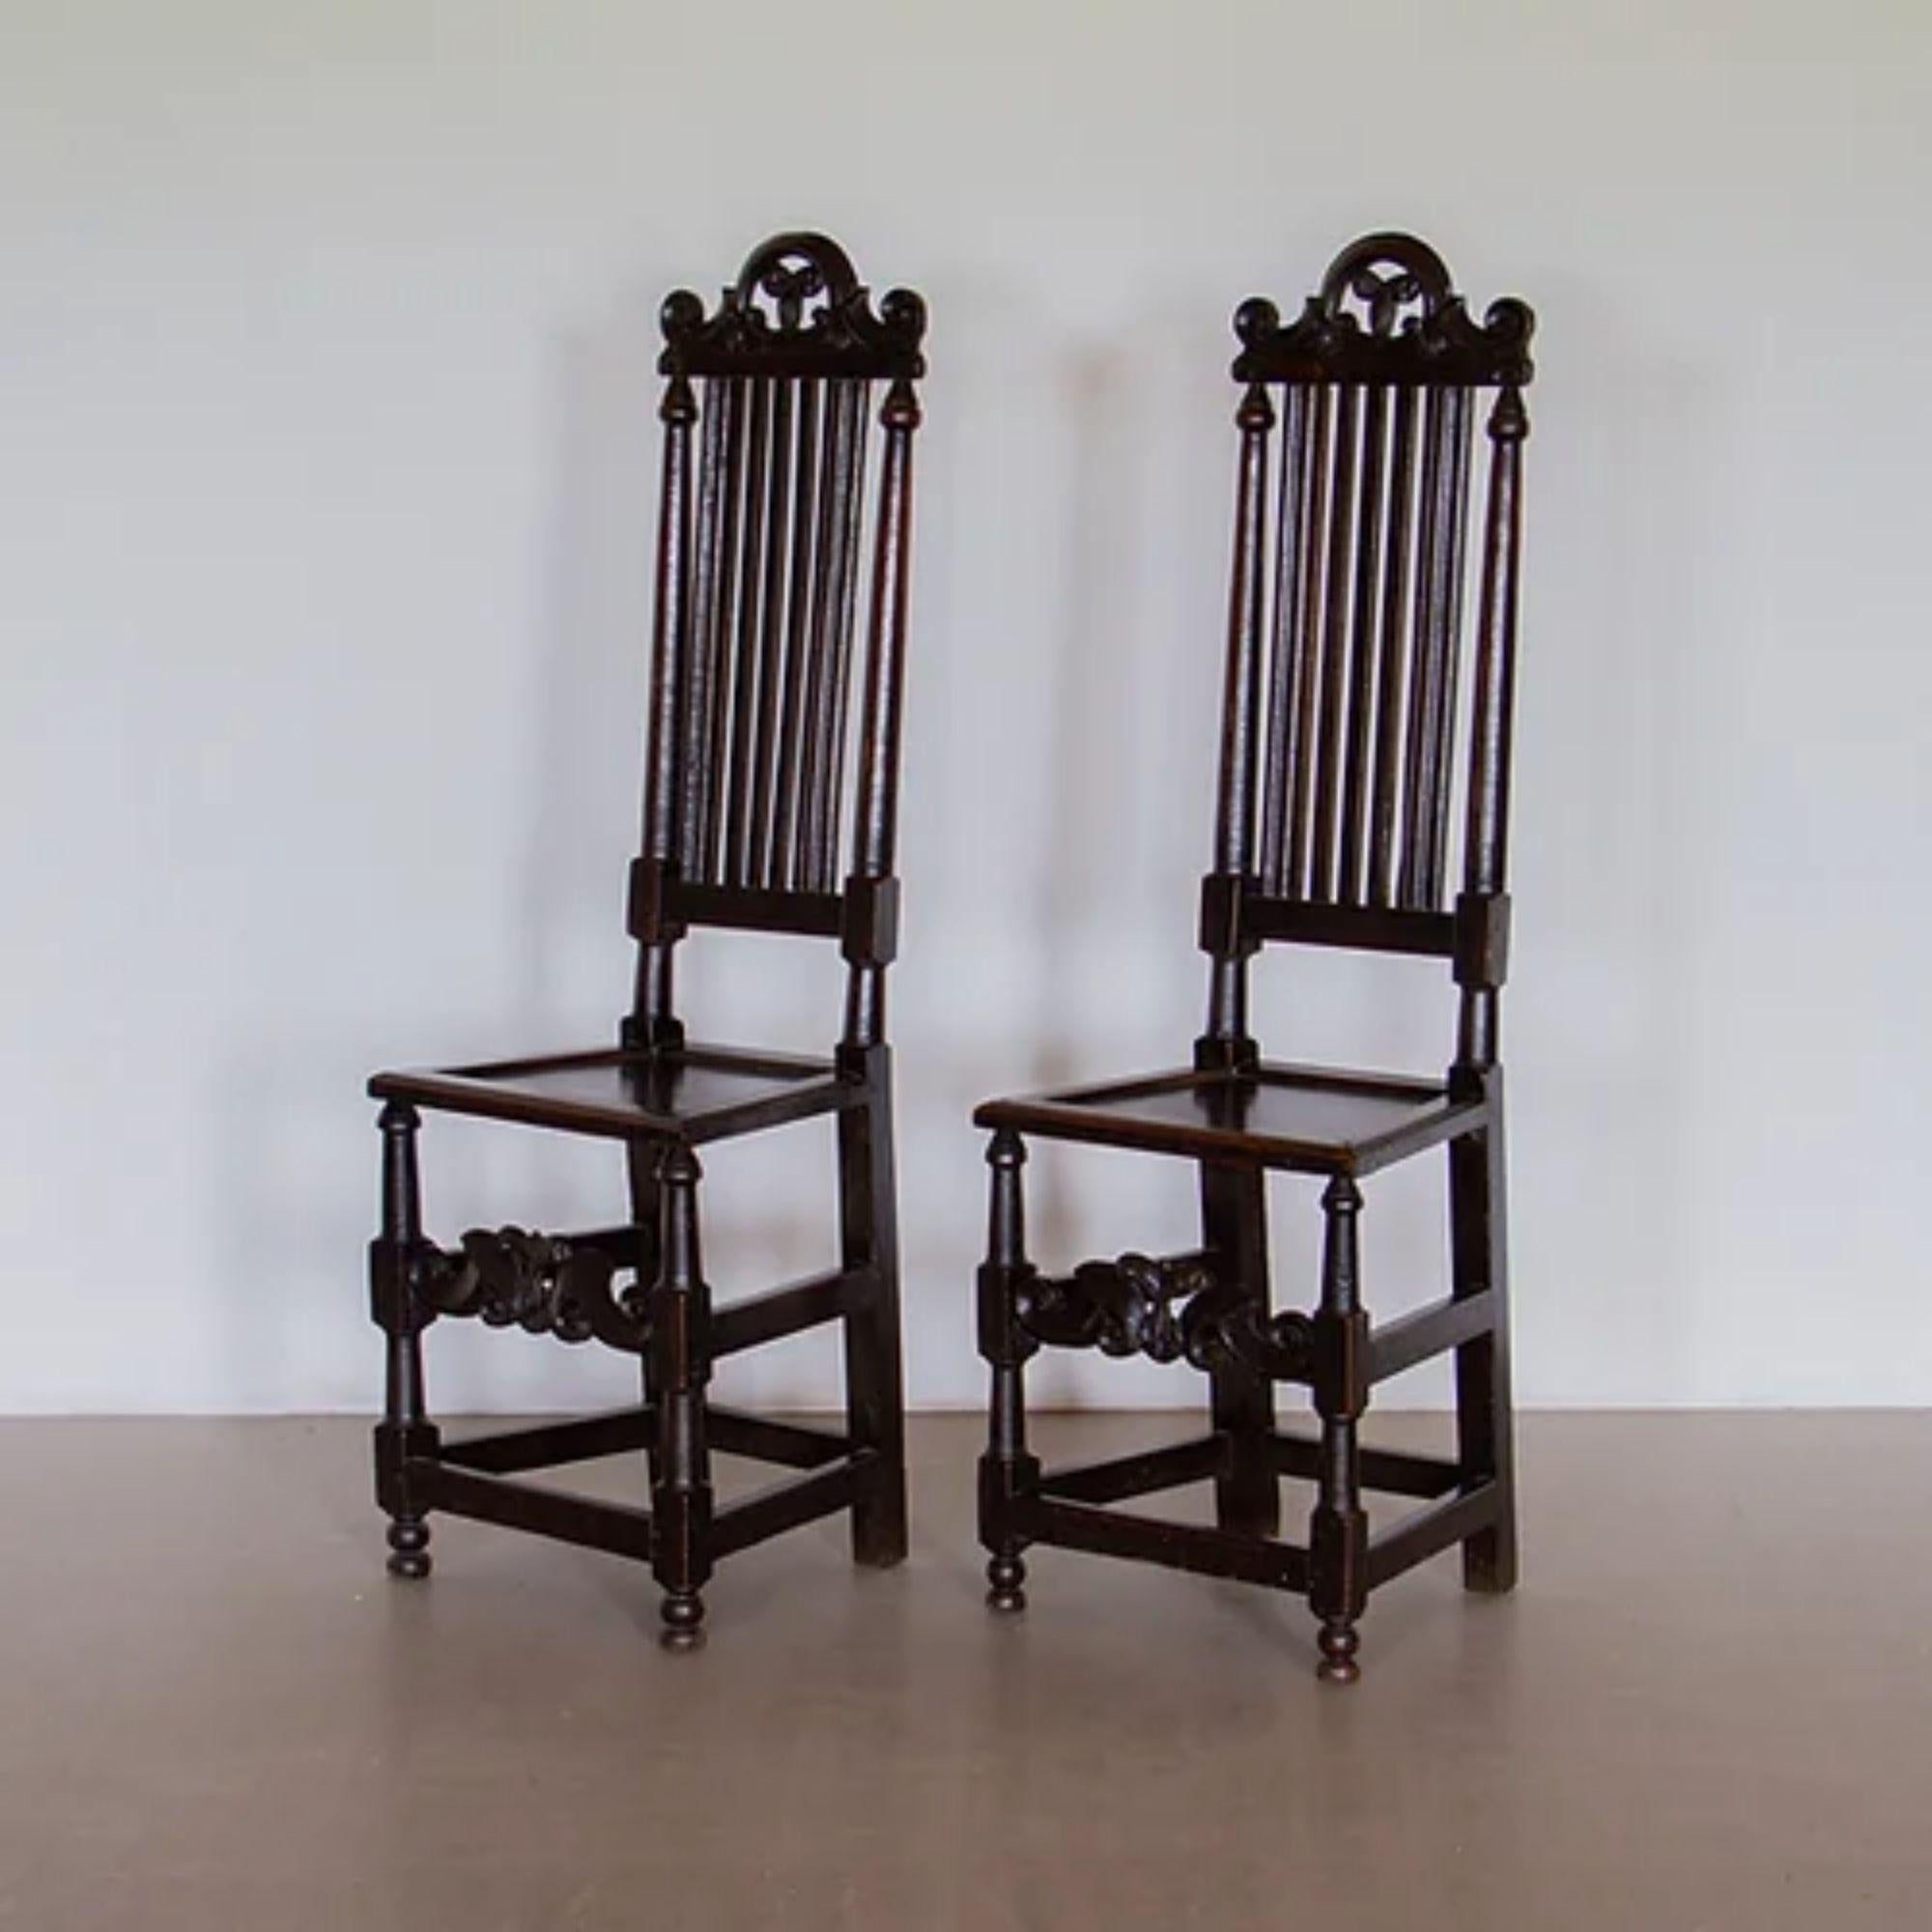 A pair of 17th century, James II, English oak, tall slat back chairs with carved scrolling detail to the back rest and seat stretcher, circa 1685

Additional information:
Material: Oak.